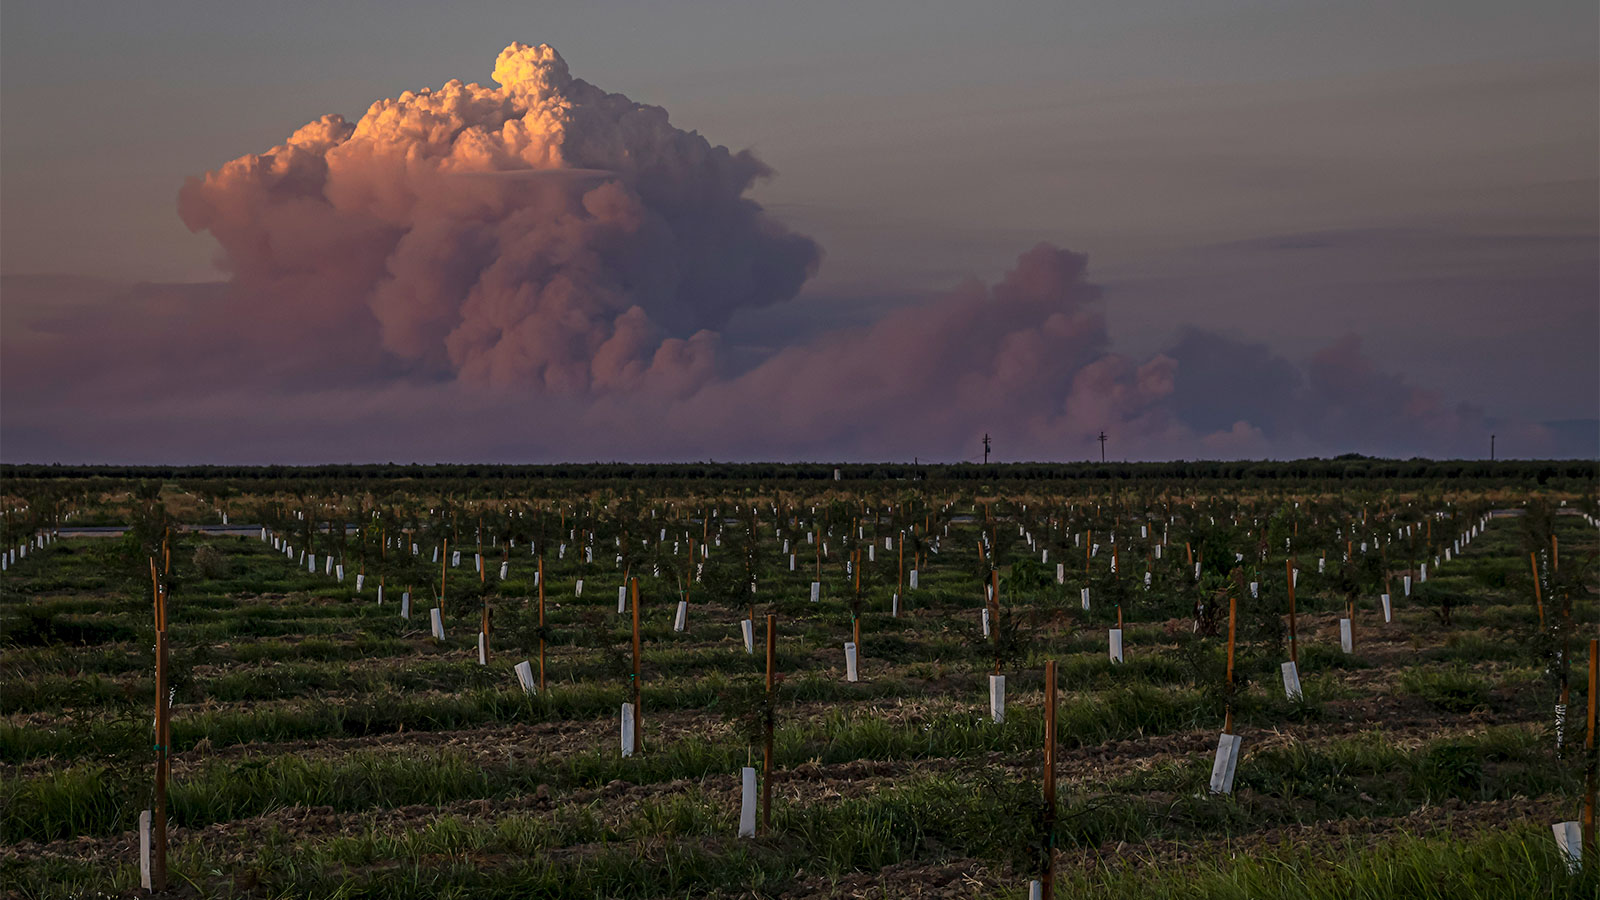 A pyrocumulonimbus cloud of wildfire smoke rising above an orchard of immature trees